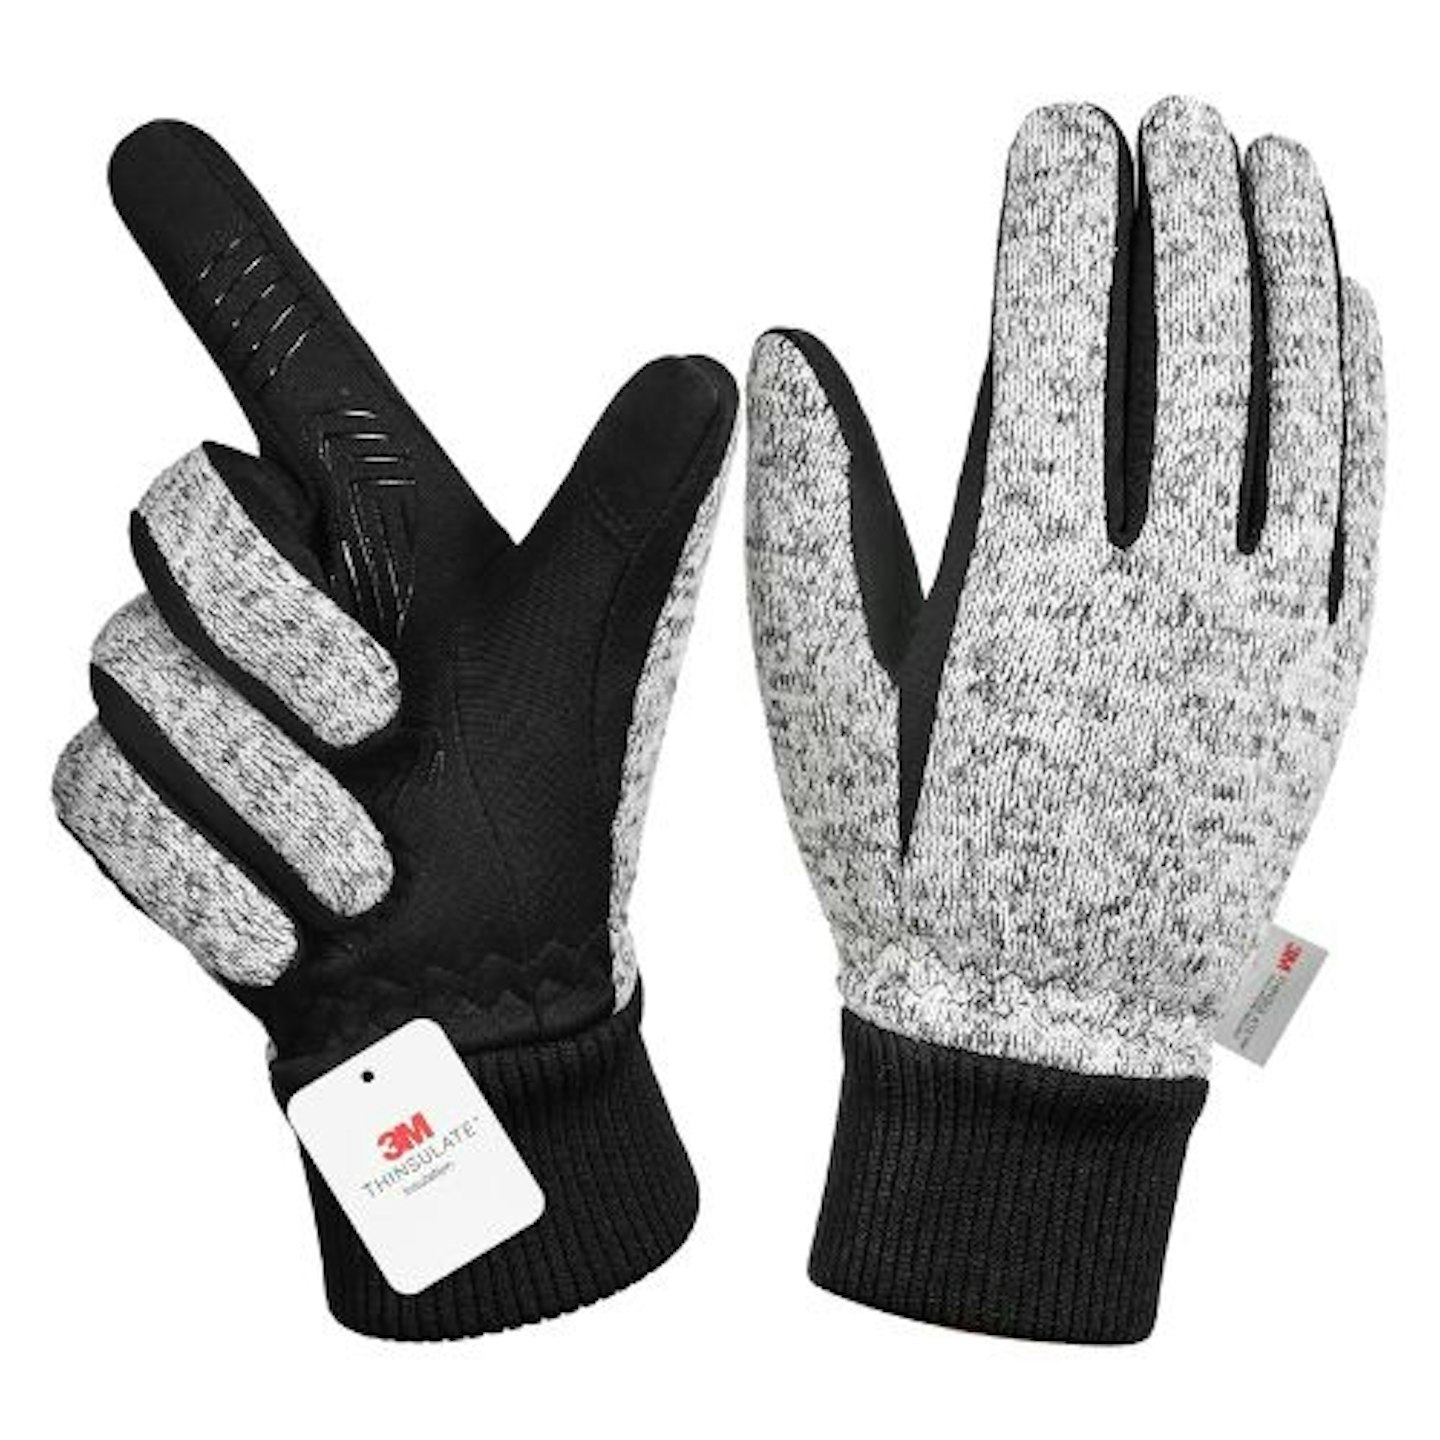 Winter Gloves for Men Women,-10°F 3M Thinsulate Thermal Gloves Coldproof Touchscreen Warm Gloves,Anti-Slip Road Bike Cycling Gloves for Skiing Cycling...